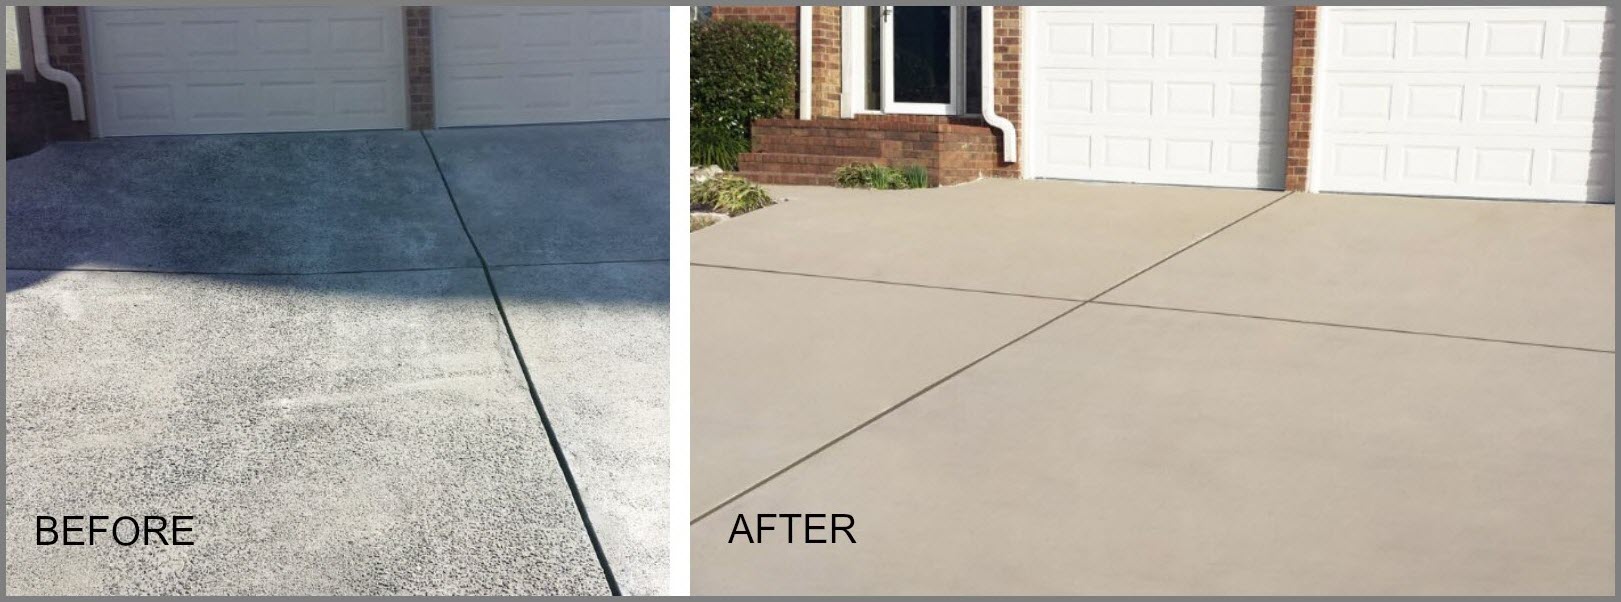 Driveway before after